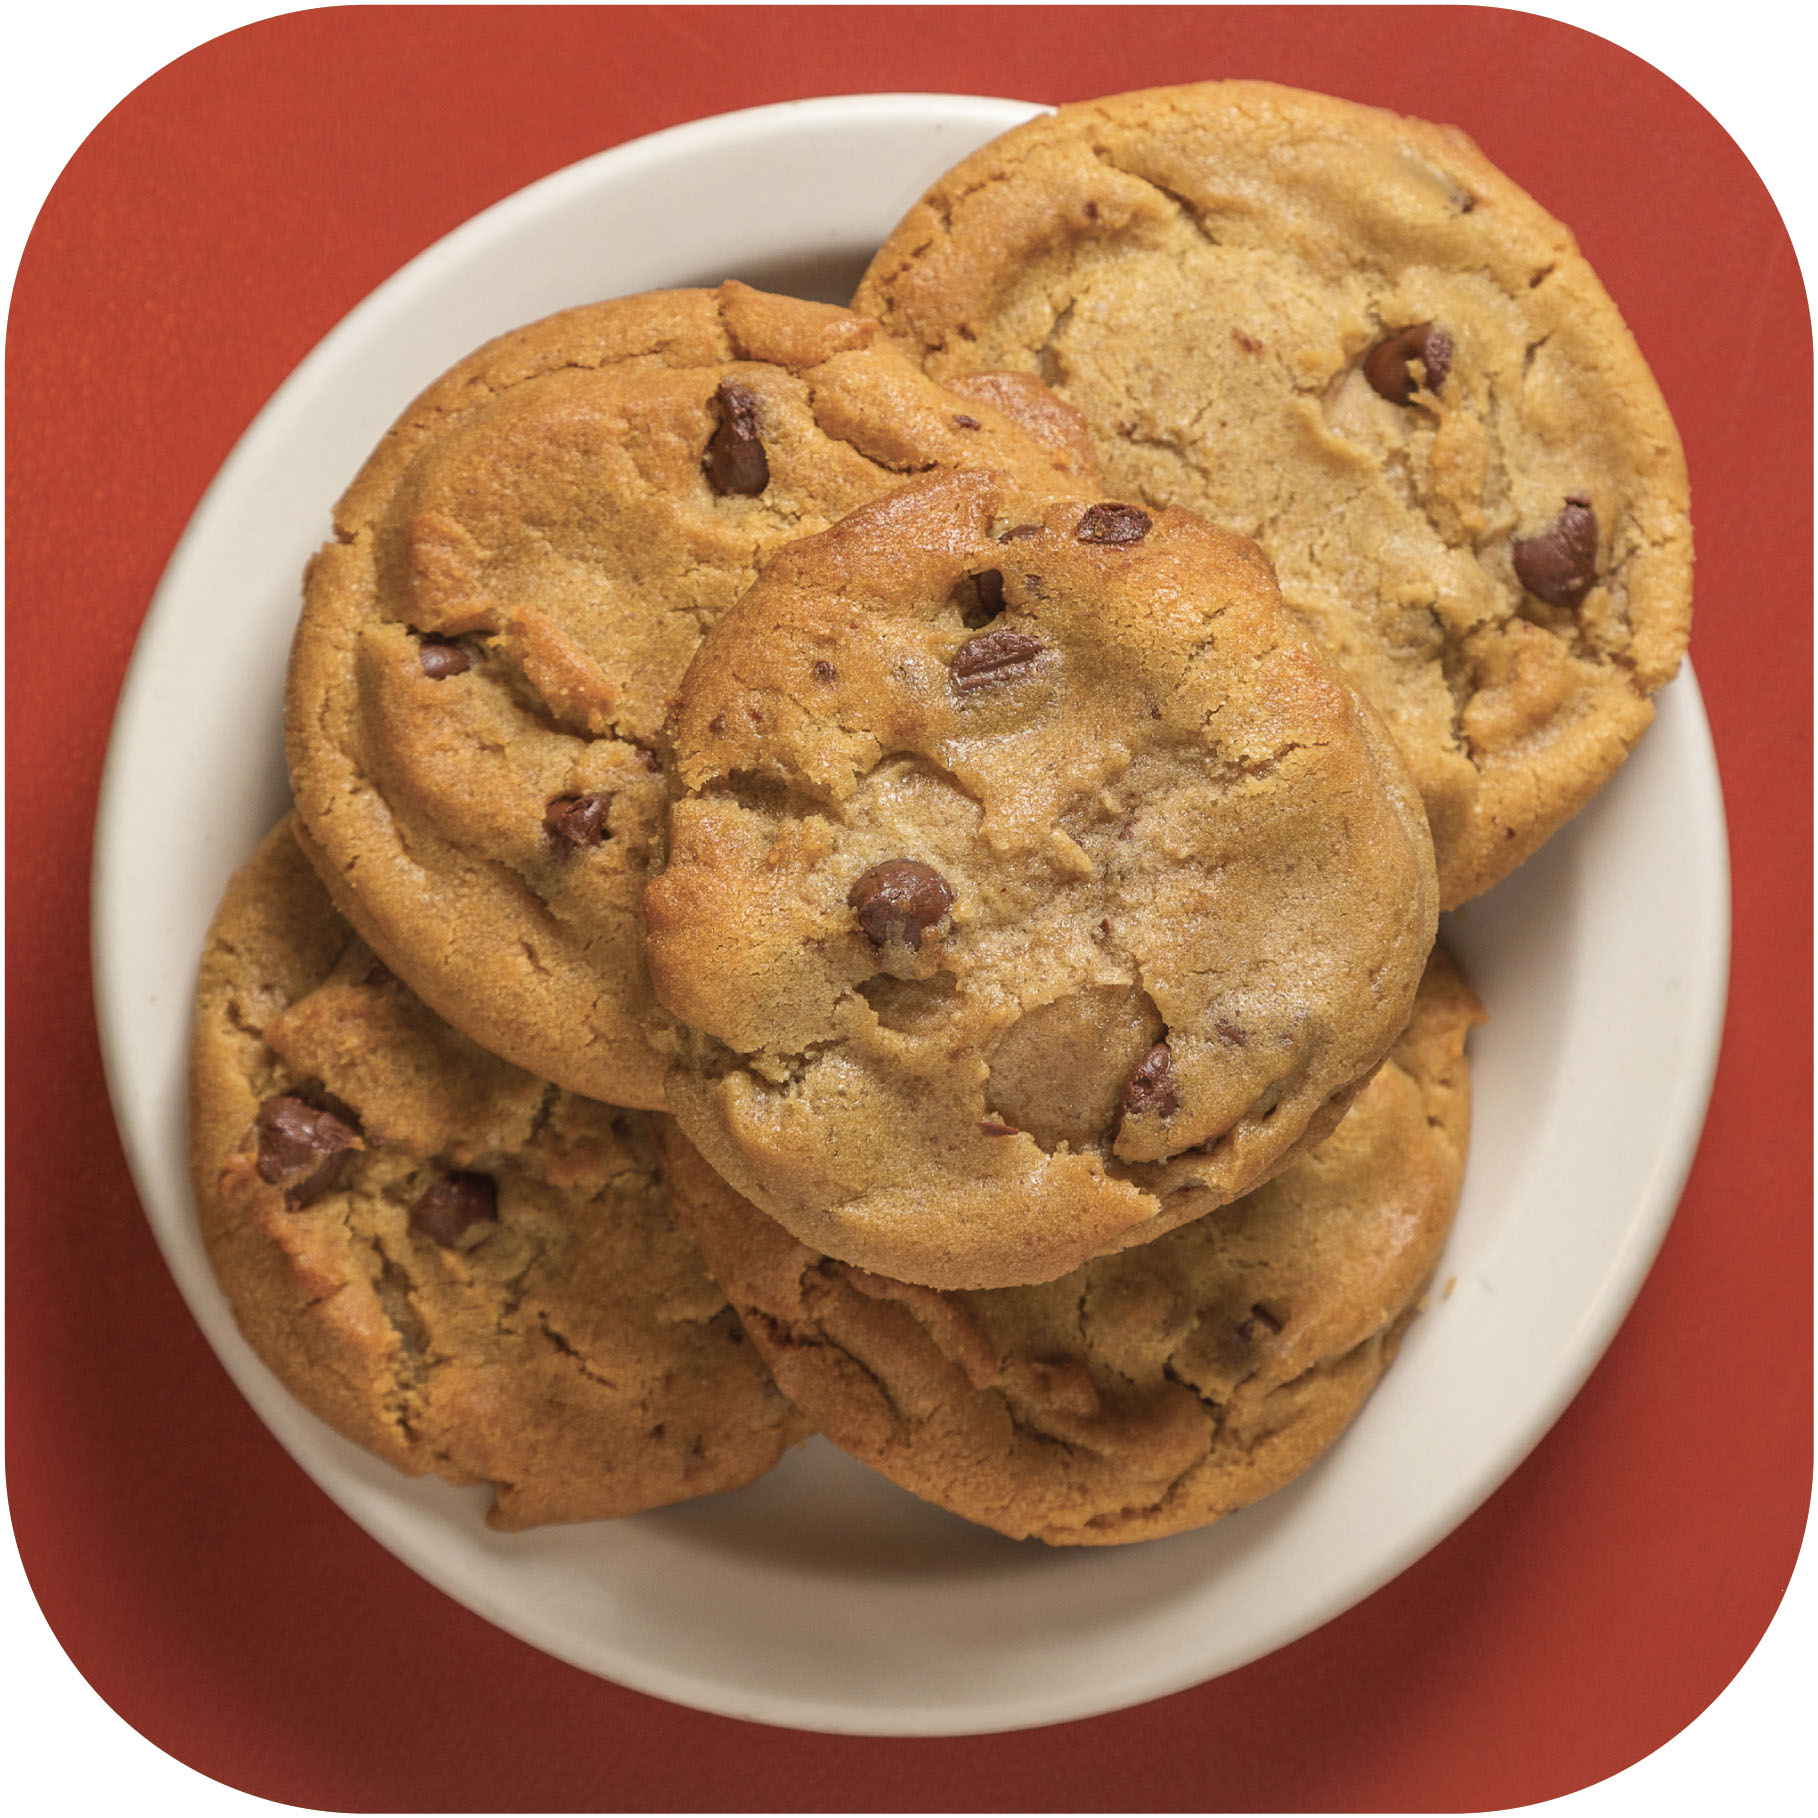 plate of chocolate chip cookies on a red surface